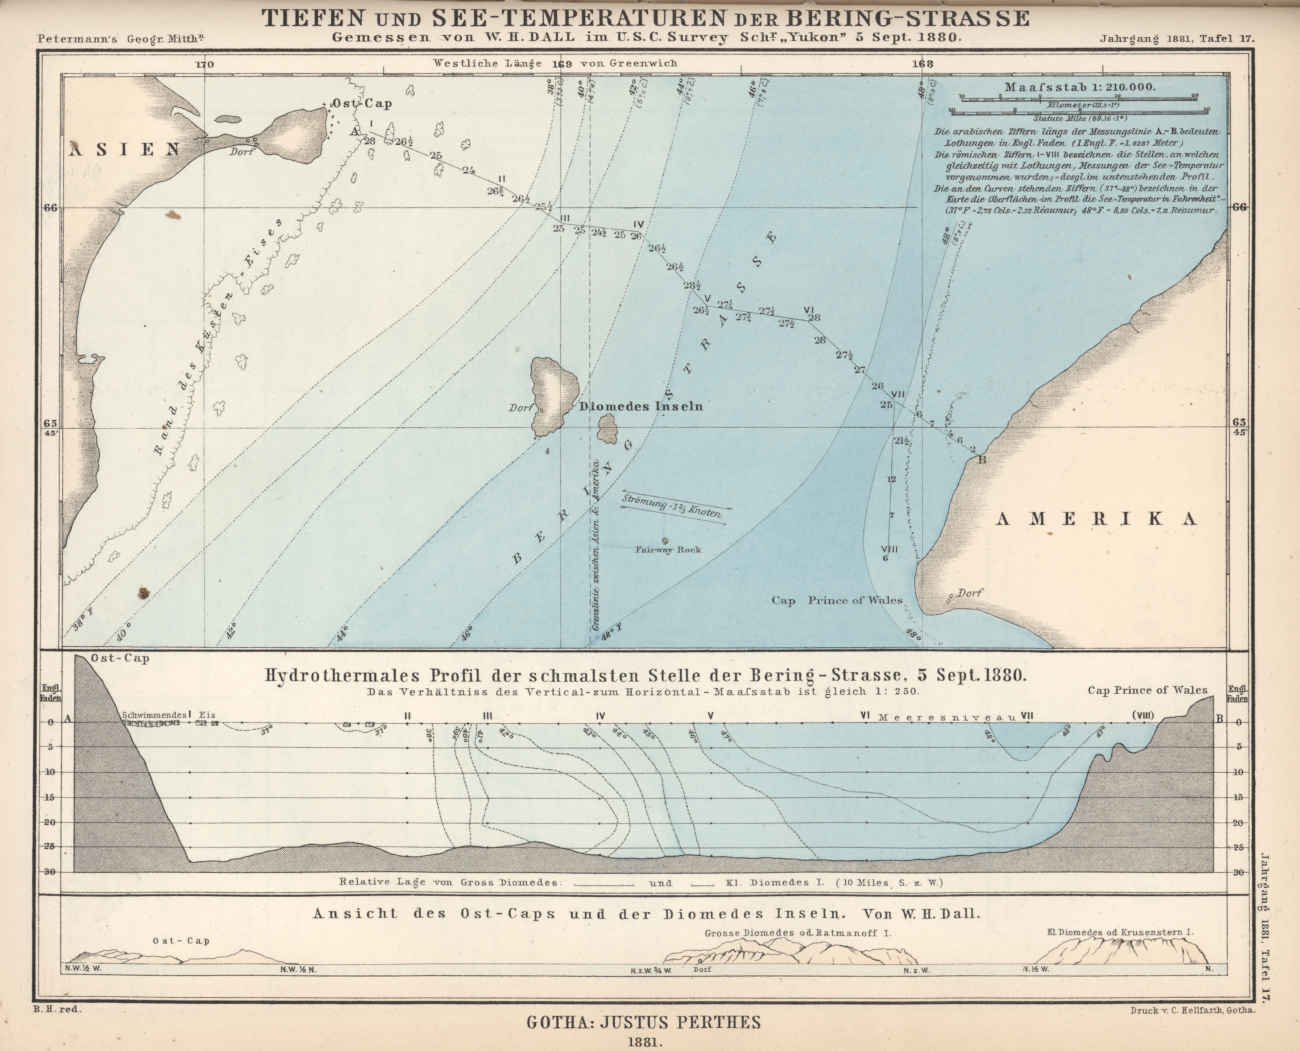 Depths and temperatures in Bering Straits as observed by William Healy Dall onthe Coast Survey schooner YUKON in 1880